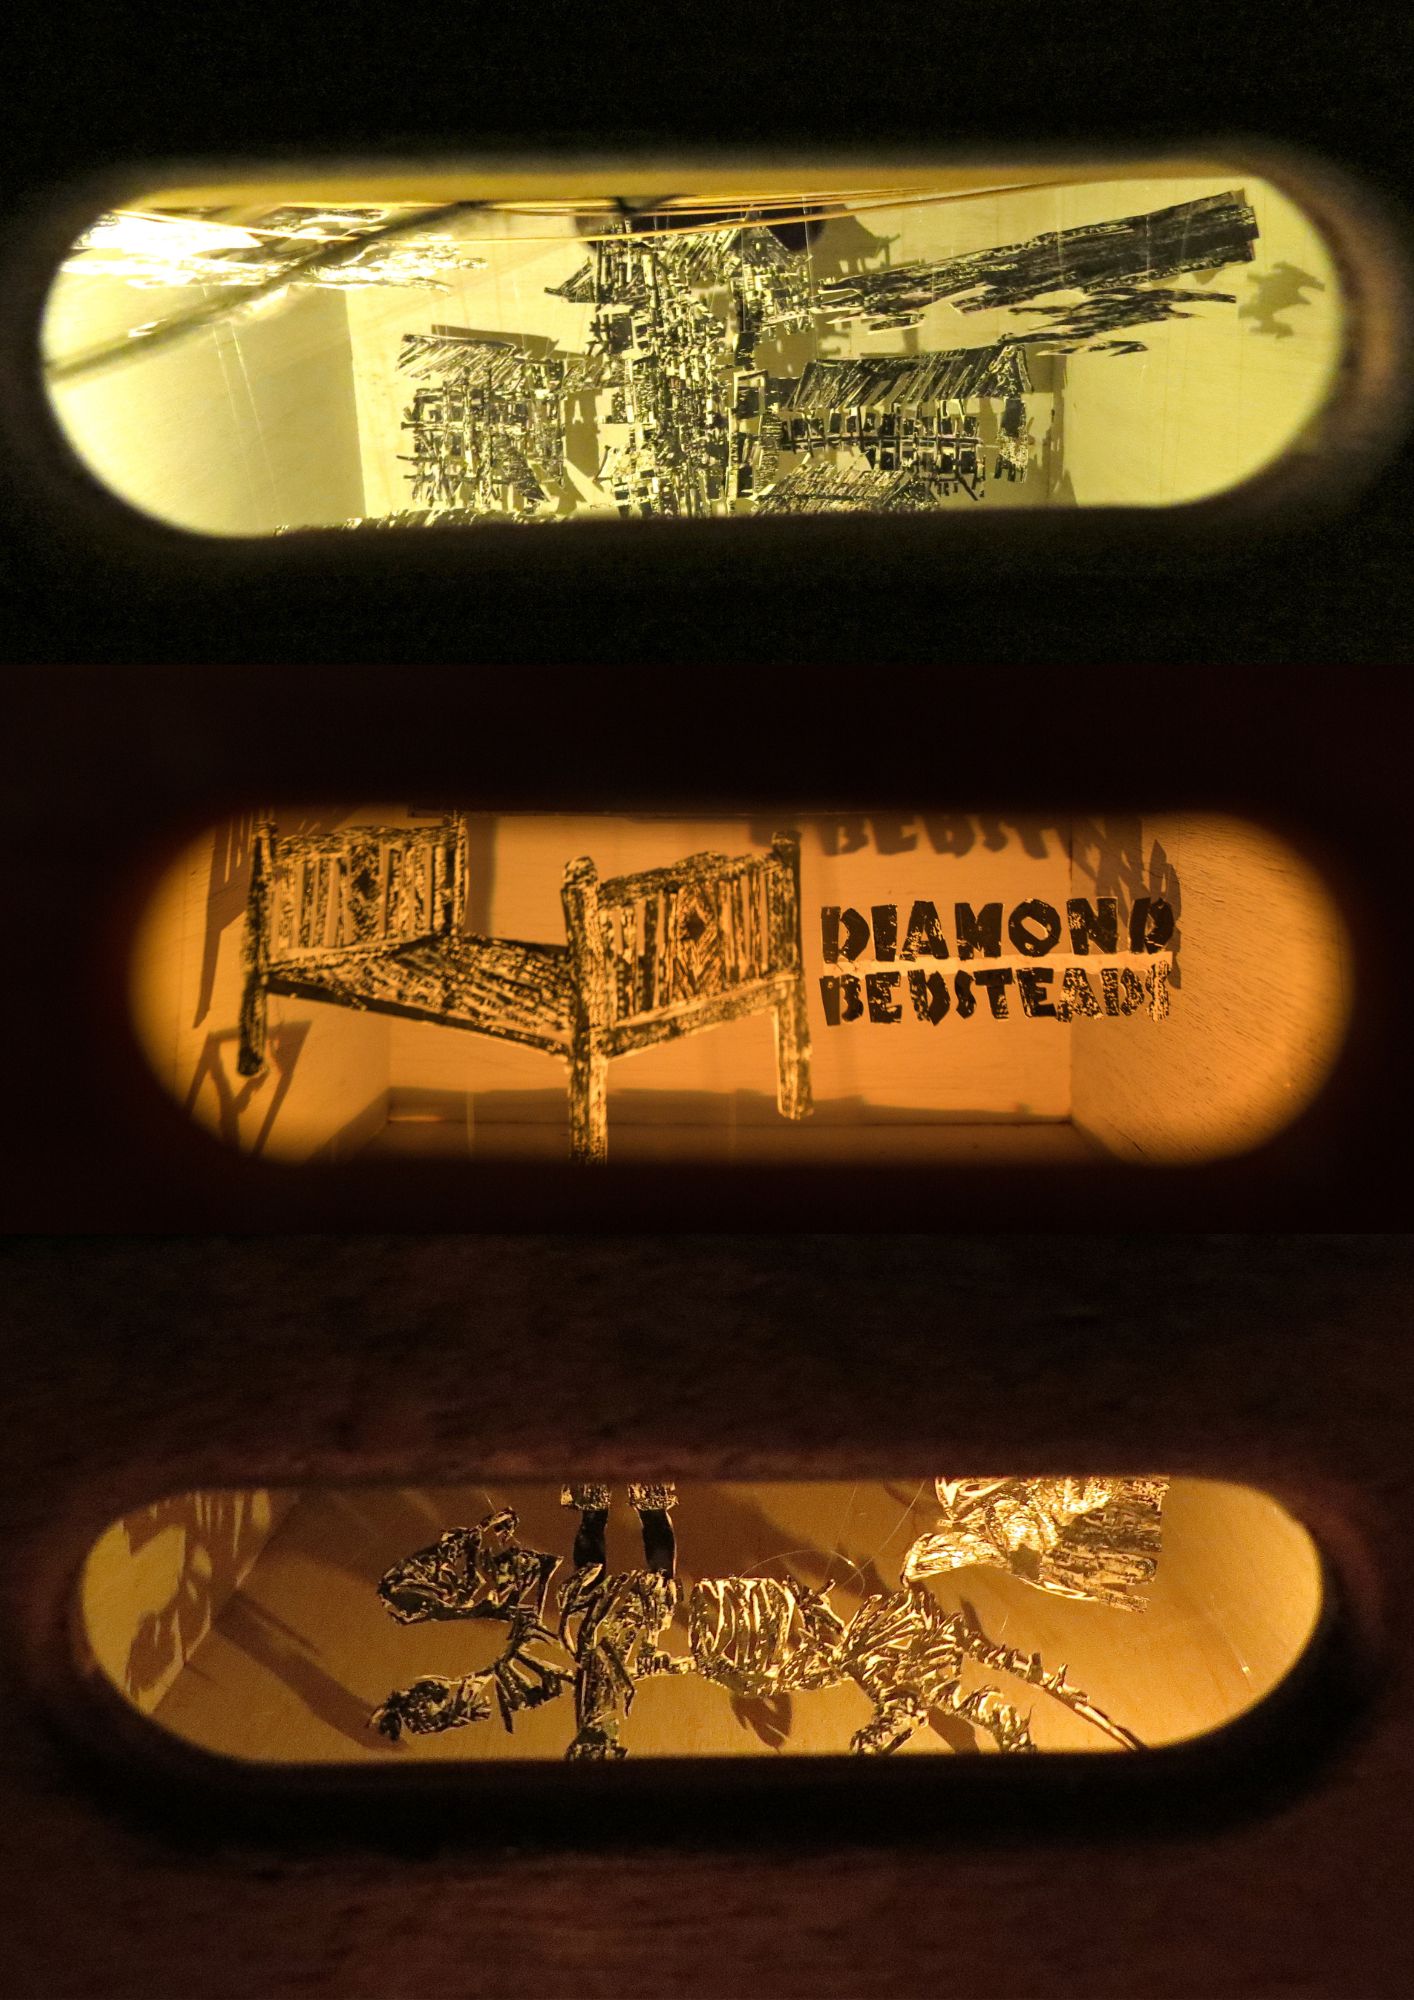 Top: Lee Kee Boon’s 1955 woodcut print, Nanyang University; middle: the advertisement for Diamond Bedsteads from 1937; bottom: and the tiger killed in Singapore’s Chua Chu Kang Village in 1937, each reinterpreted by Davis (2014) as woodprint shadowpuppet collages.